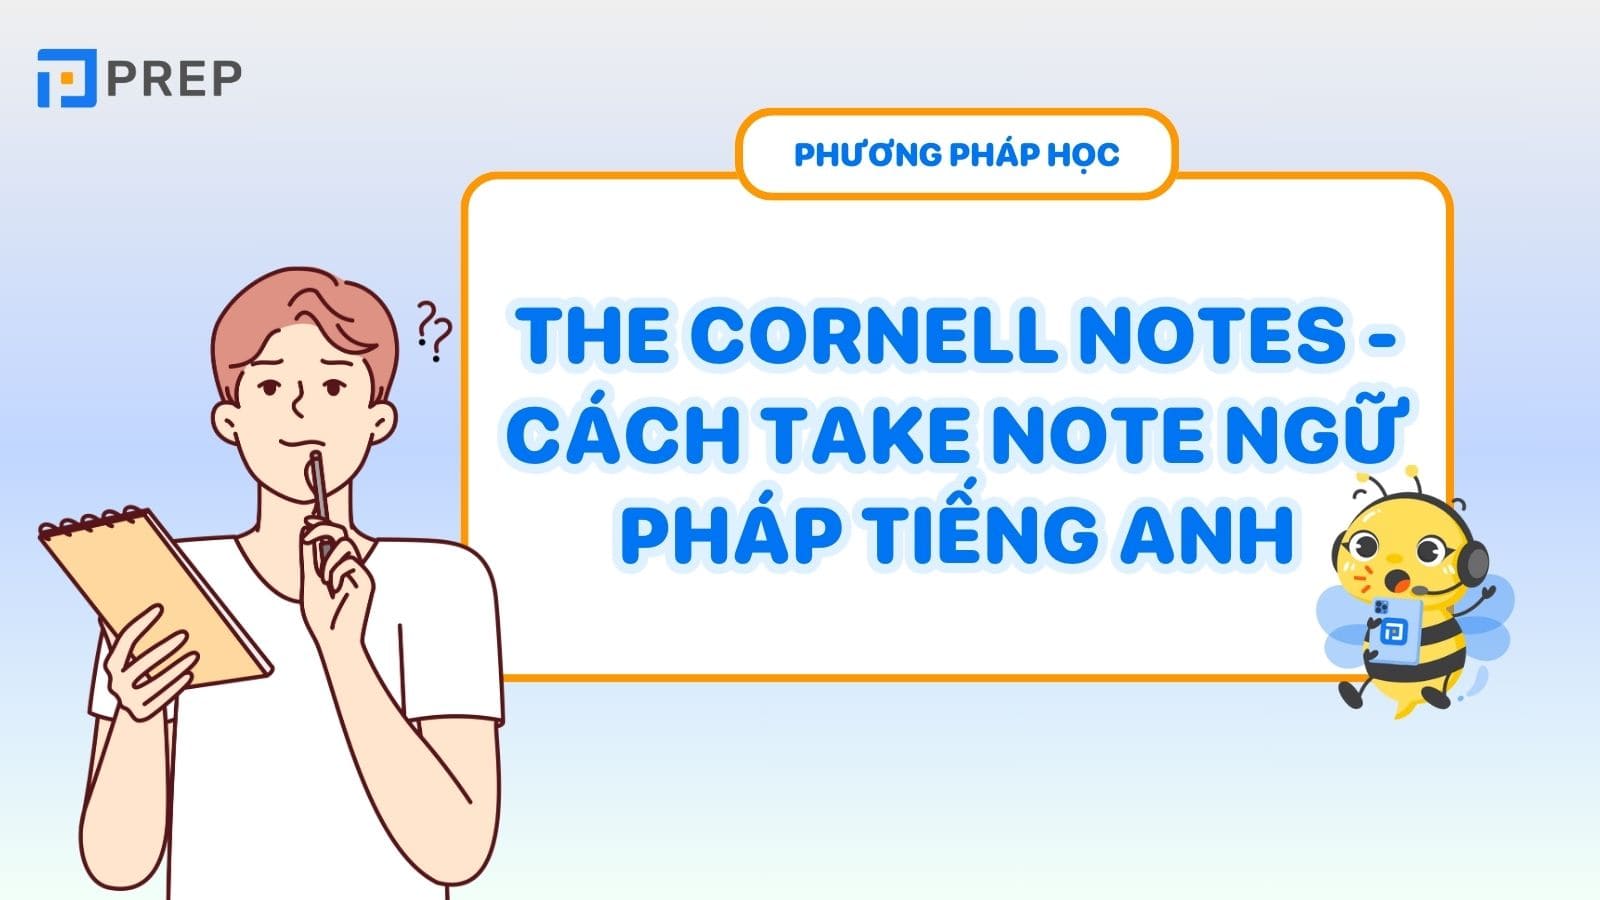 the-cornell-notes-cach-take-note-ngu-phap-tieng-anh.jpg